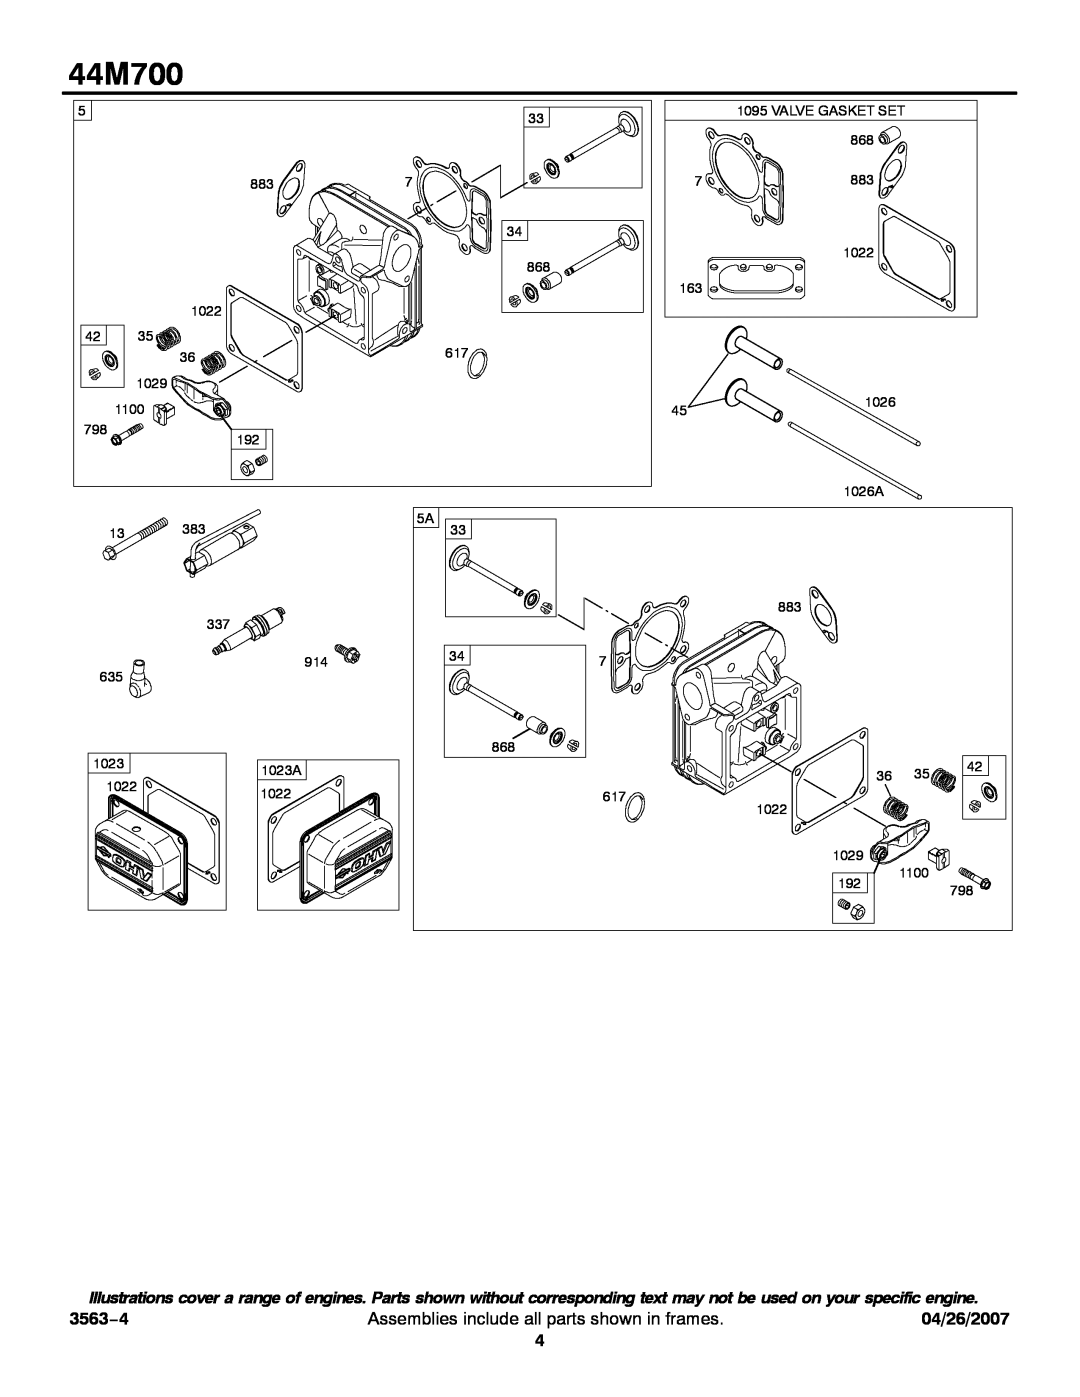 Briggs & Stratton 44M700 service manual 3563−4, Assemblies include all parts shown in frames, 04/26/2007 